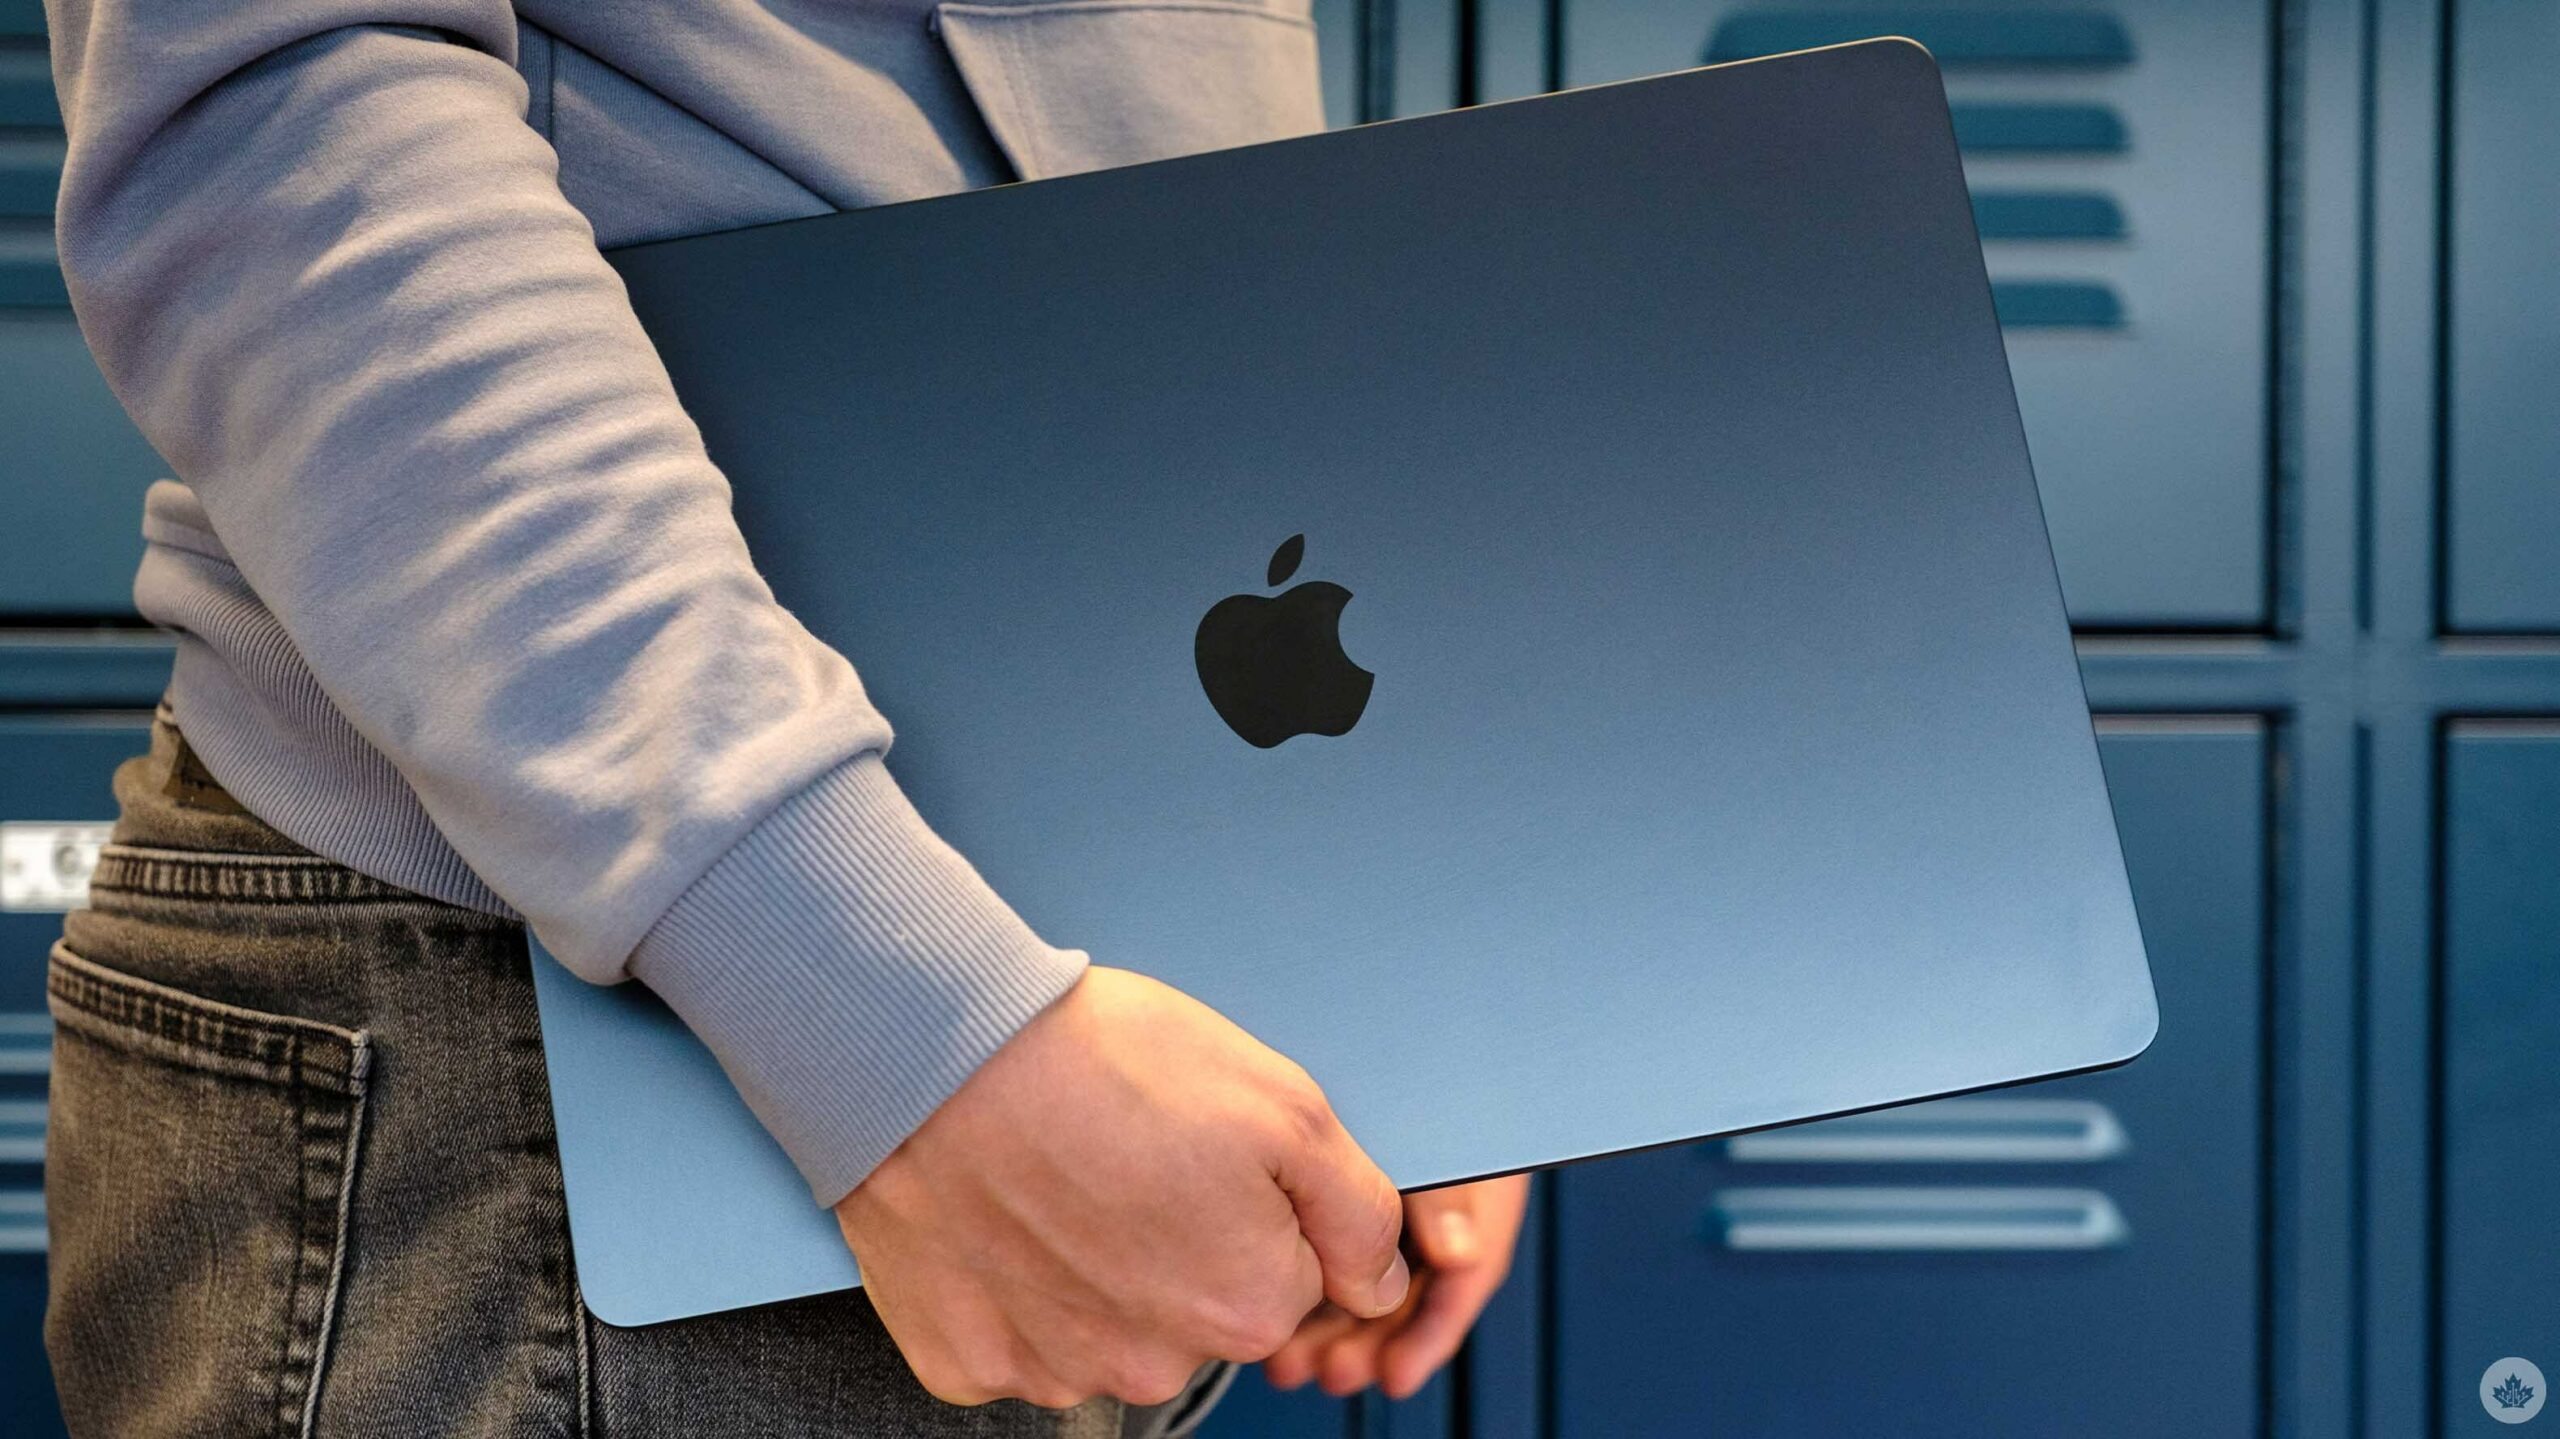 Apple's 15-inch MacBook Air is a big laptop I don't mind carrying